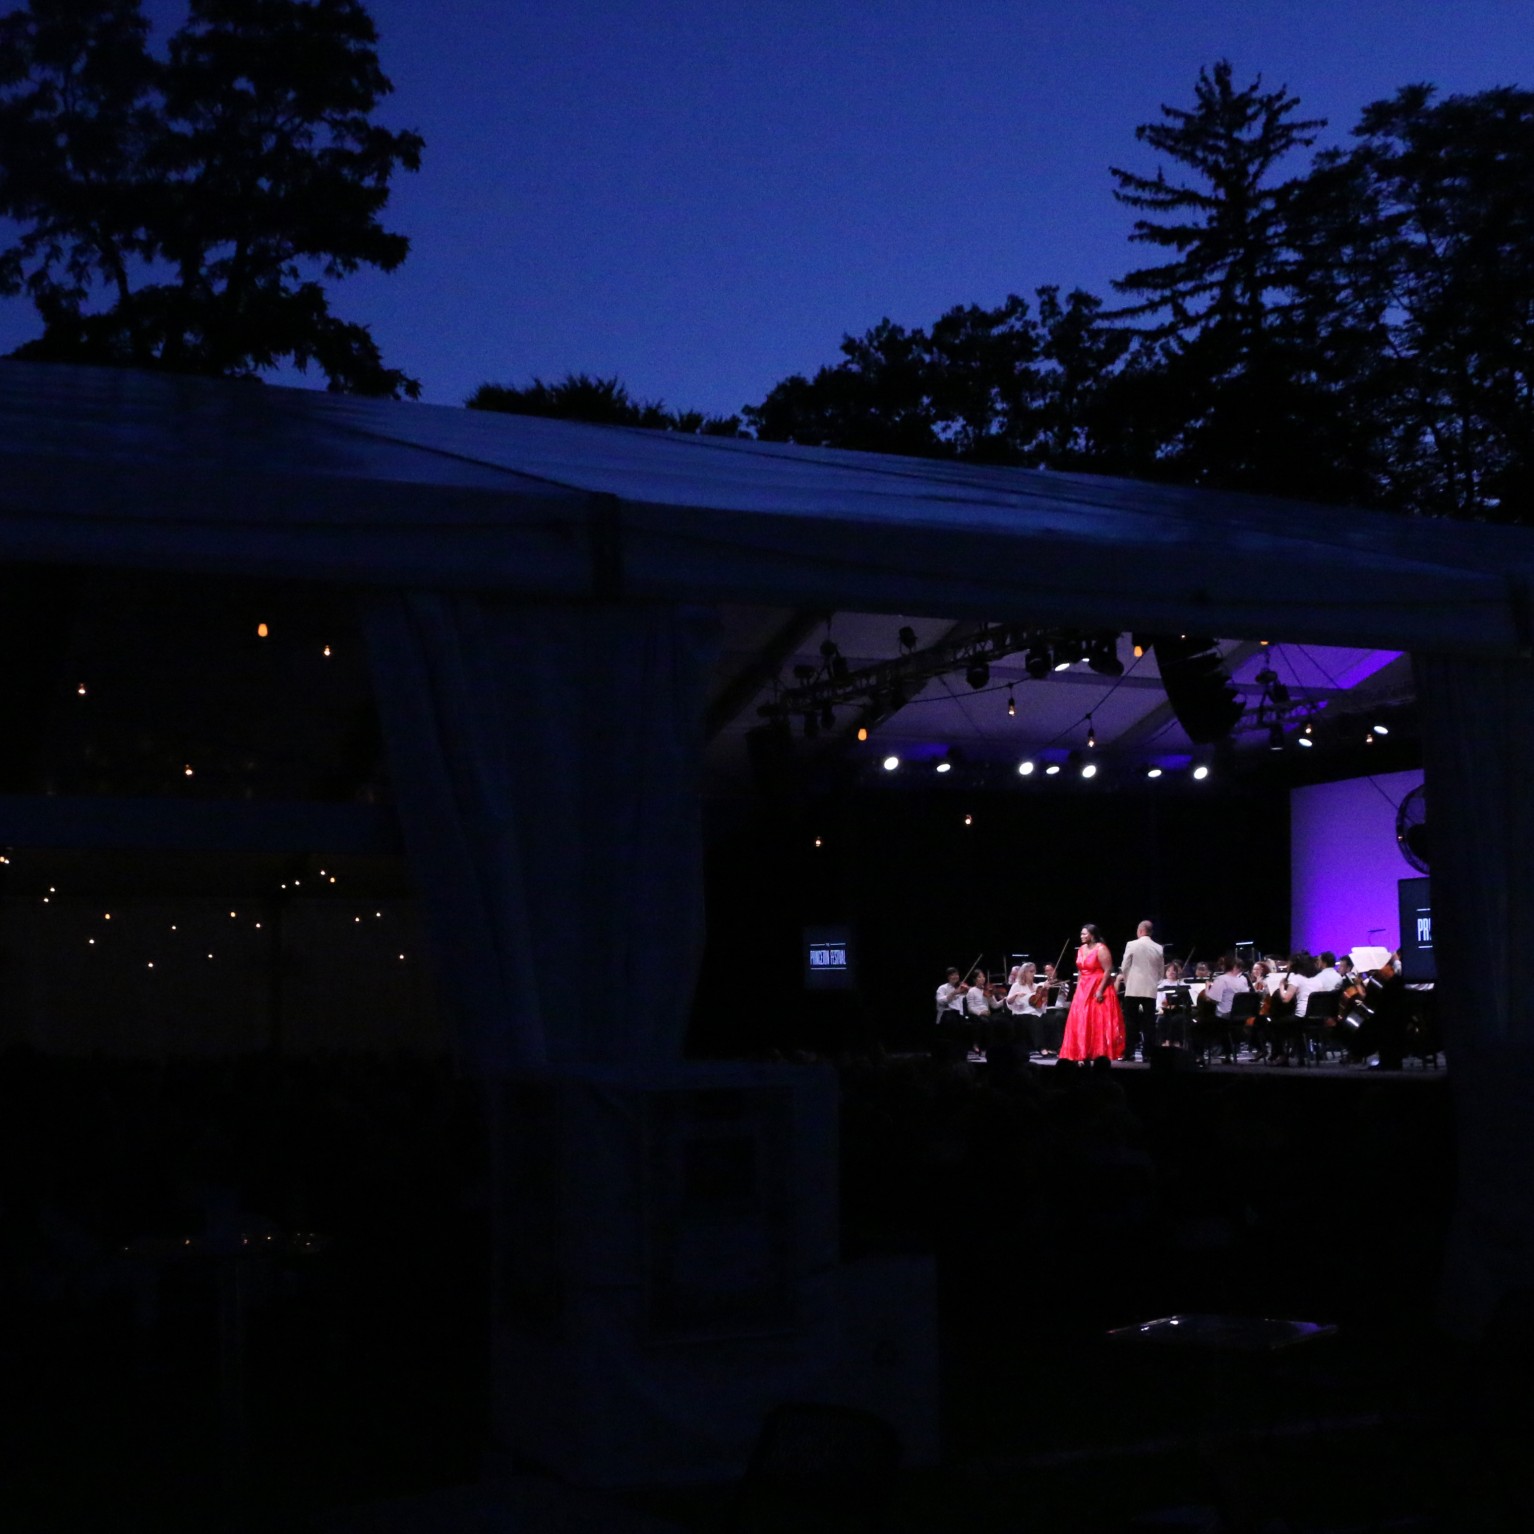 A performance with a soloist and orchestra within an outdoor pavilion underneath a nighttime sky.